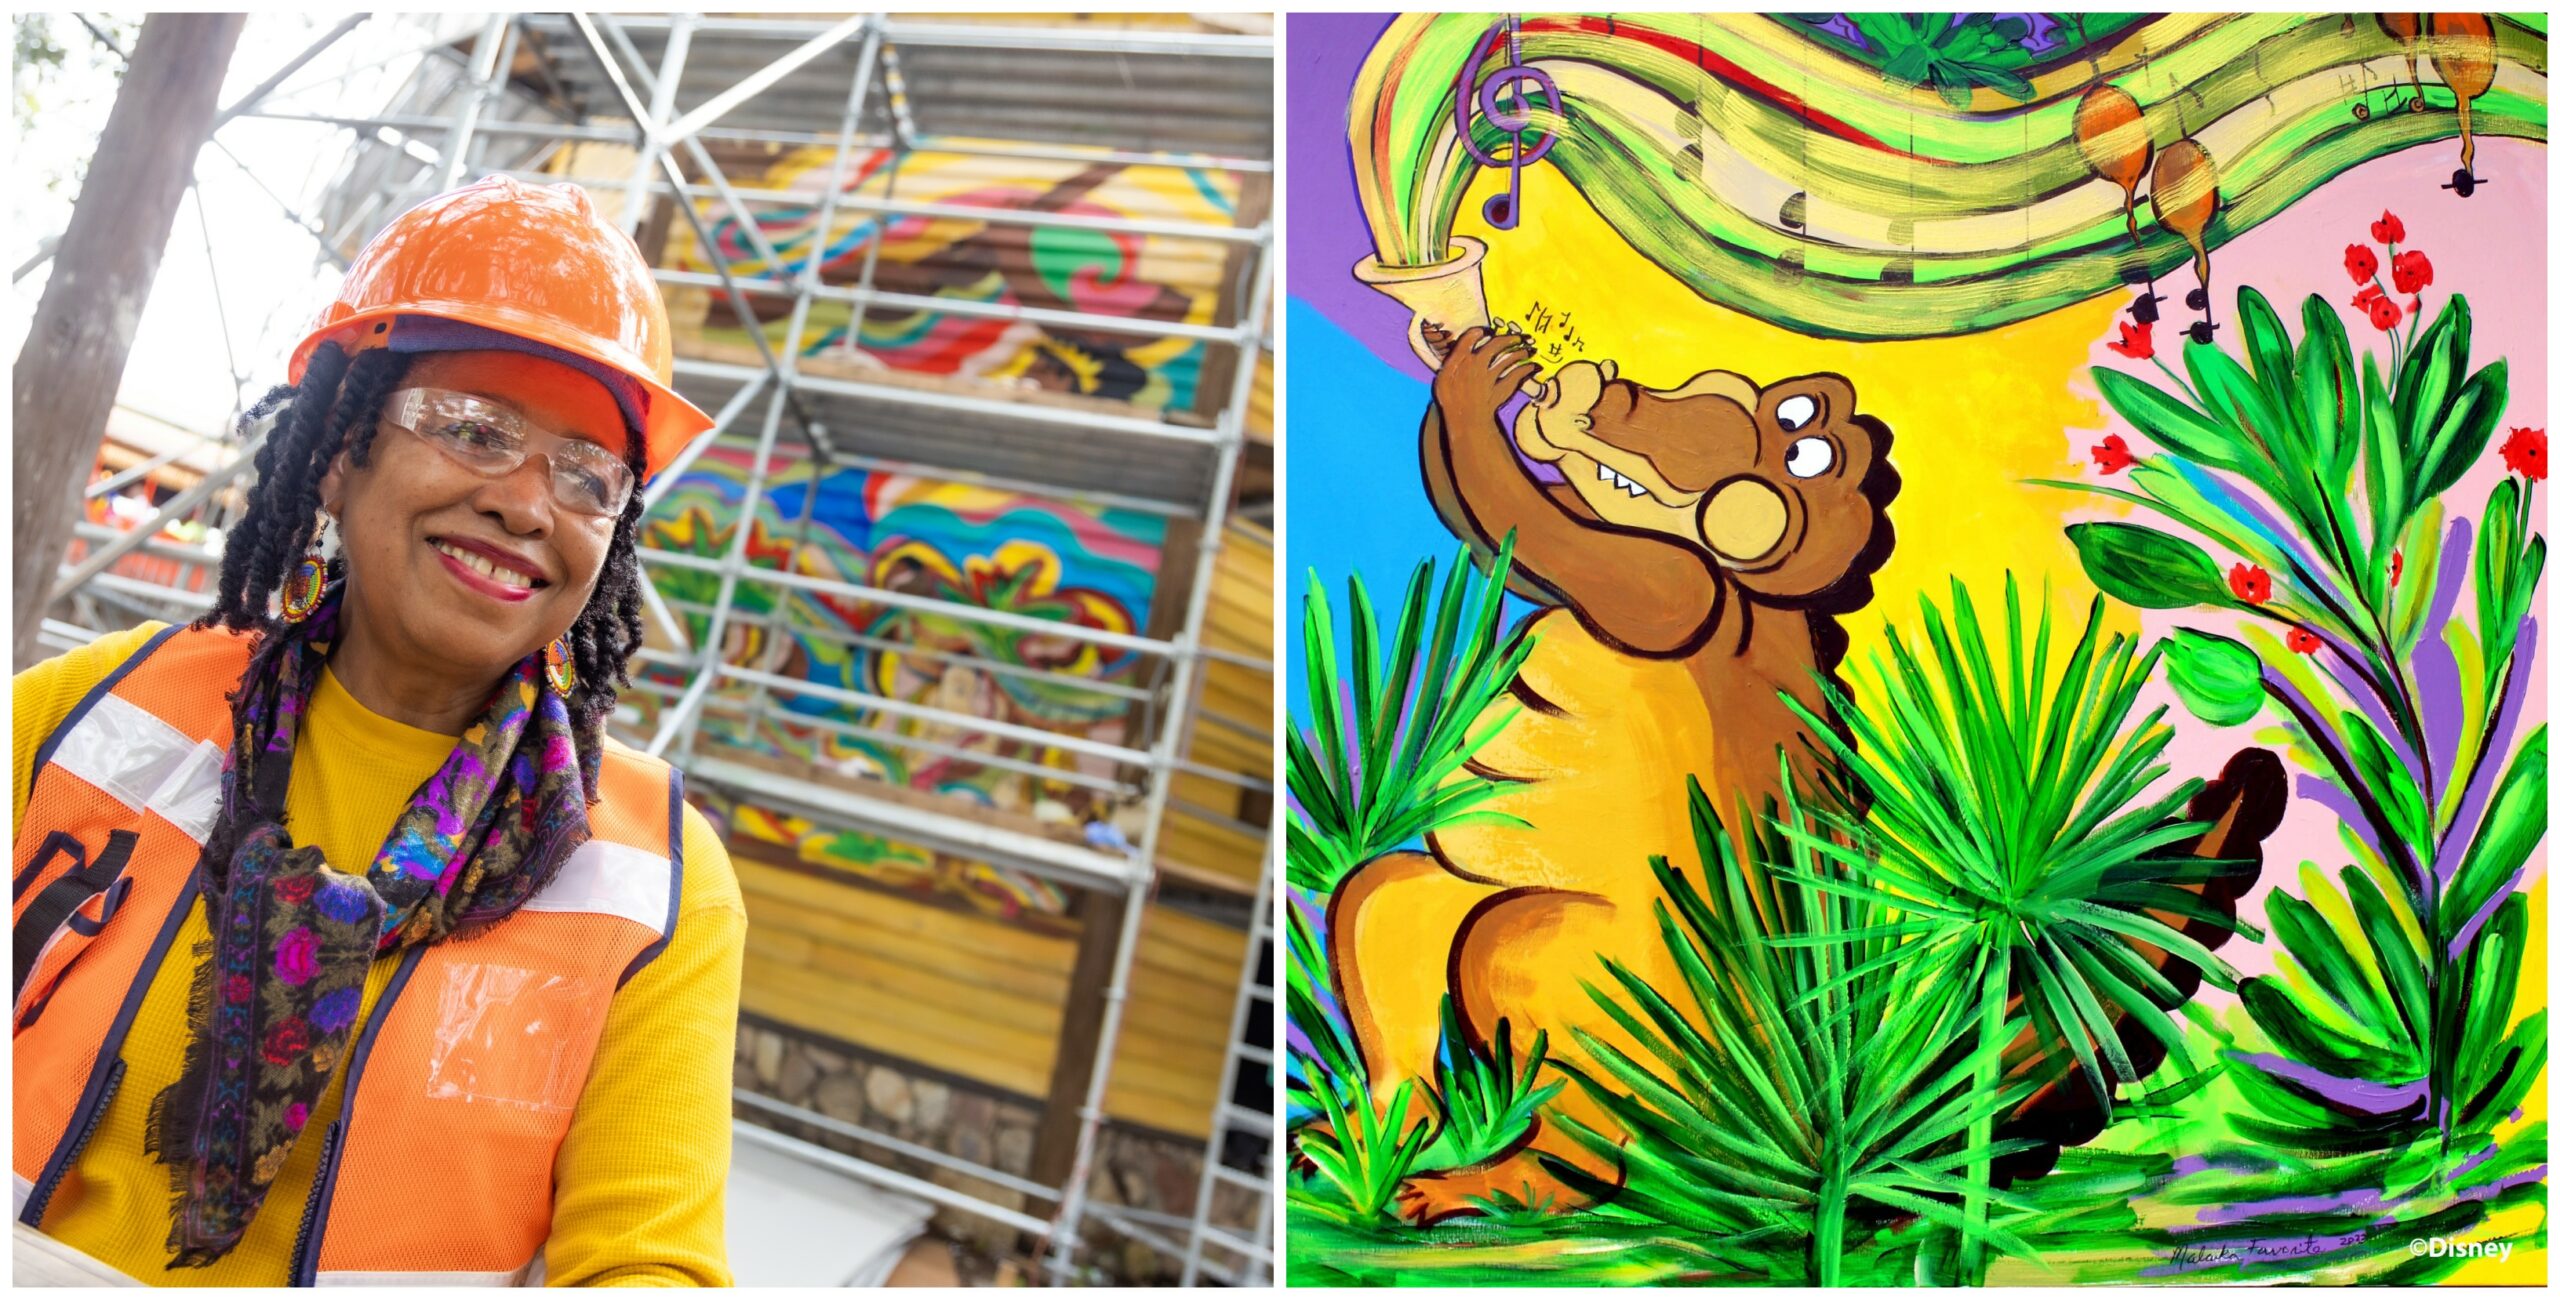 Get a First Look at the New Mural Coming to Tiana’s Bayou Adventure